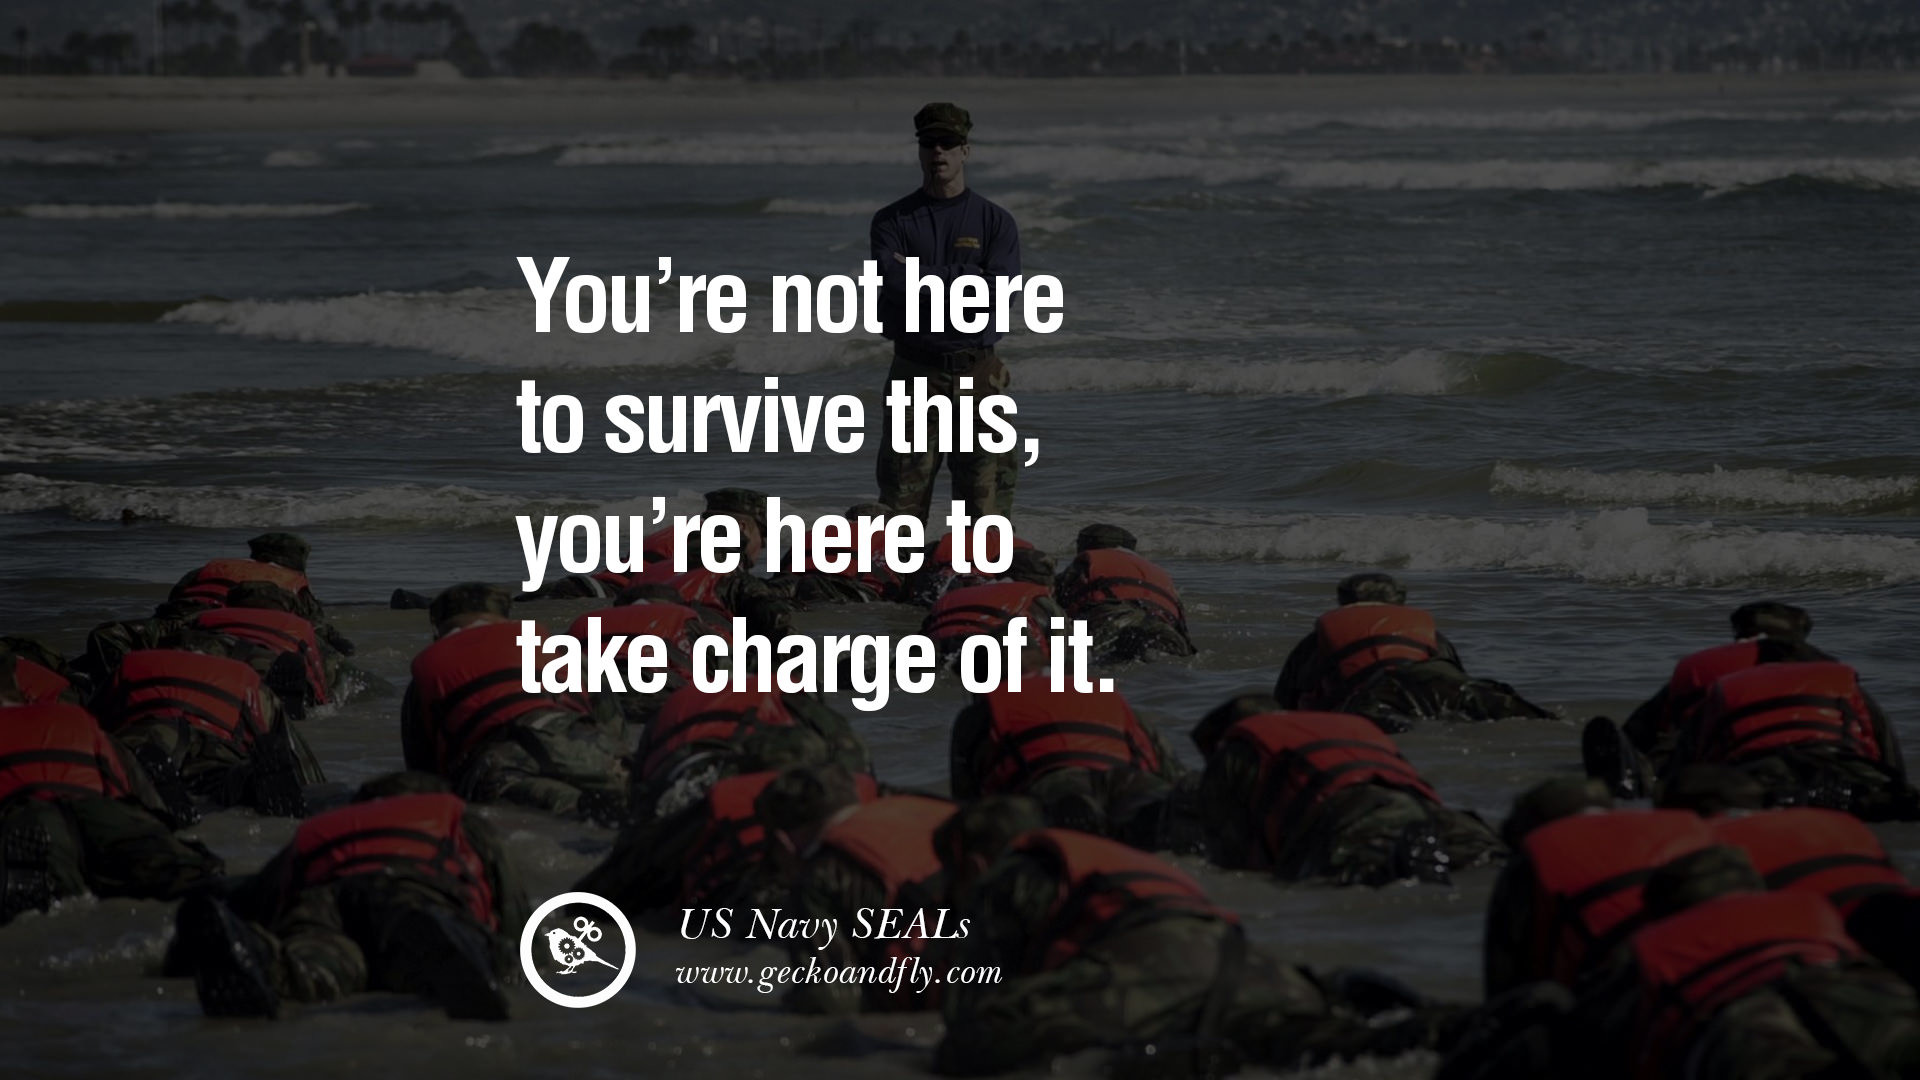 Navy Seal Quotes Wallpapers Desktop Background On Wallpaper Hd 1920 x 1080  px 623.08 KB the